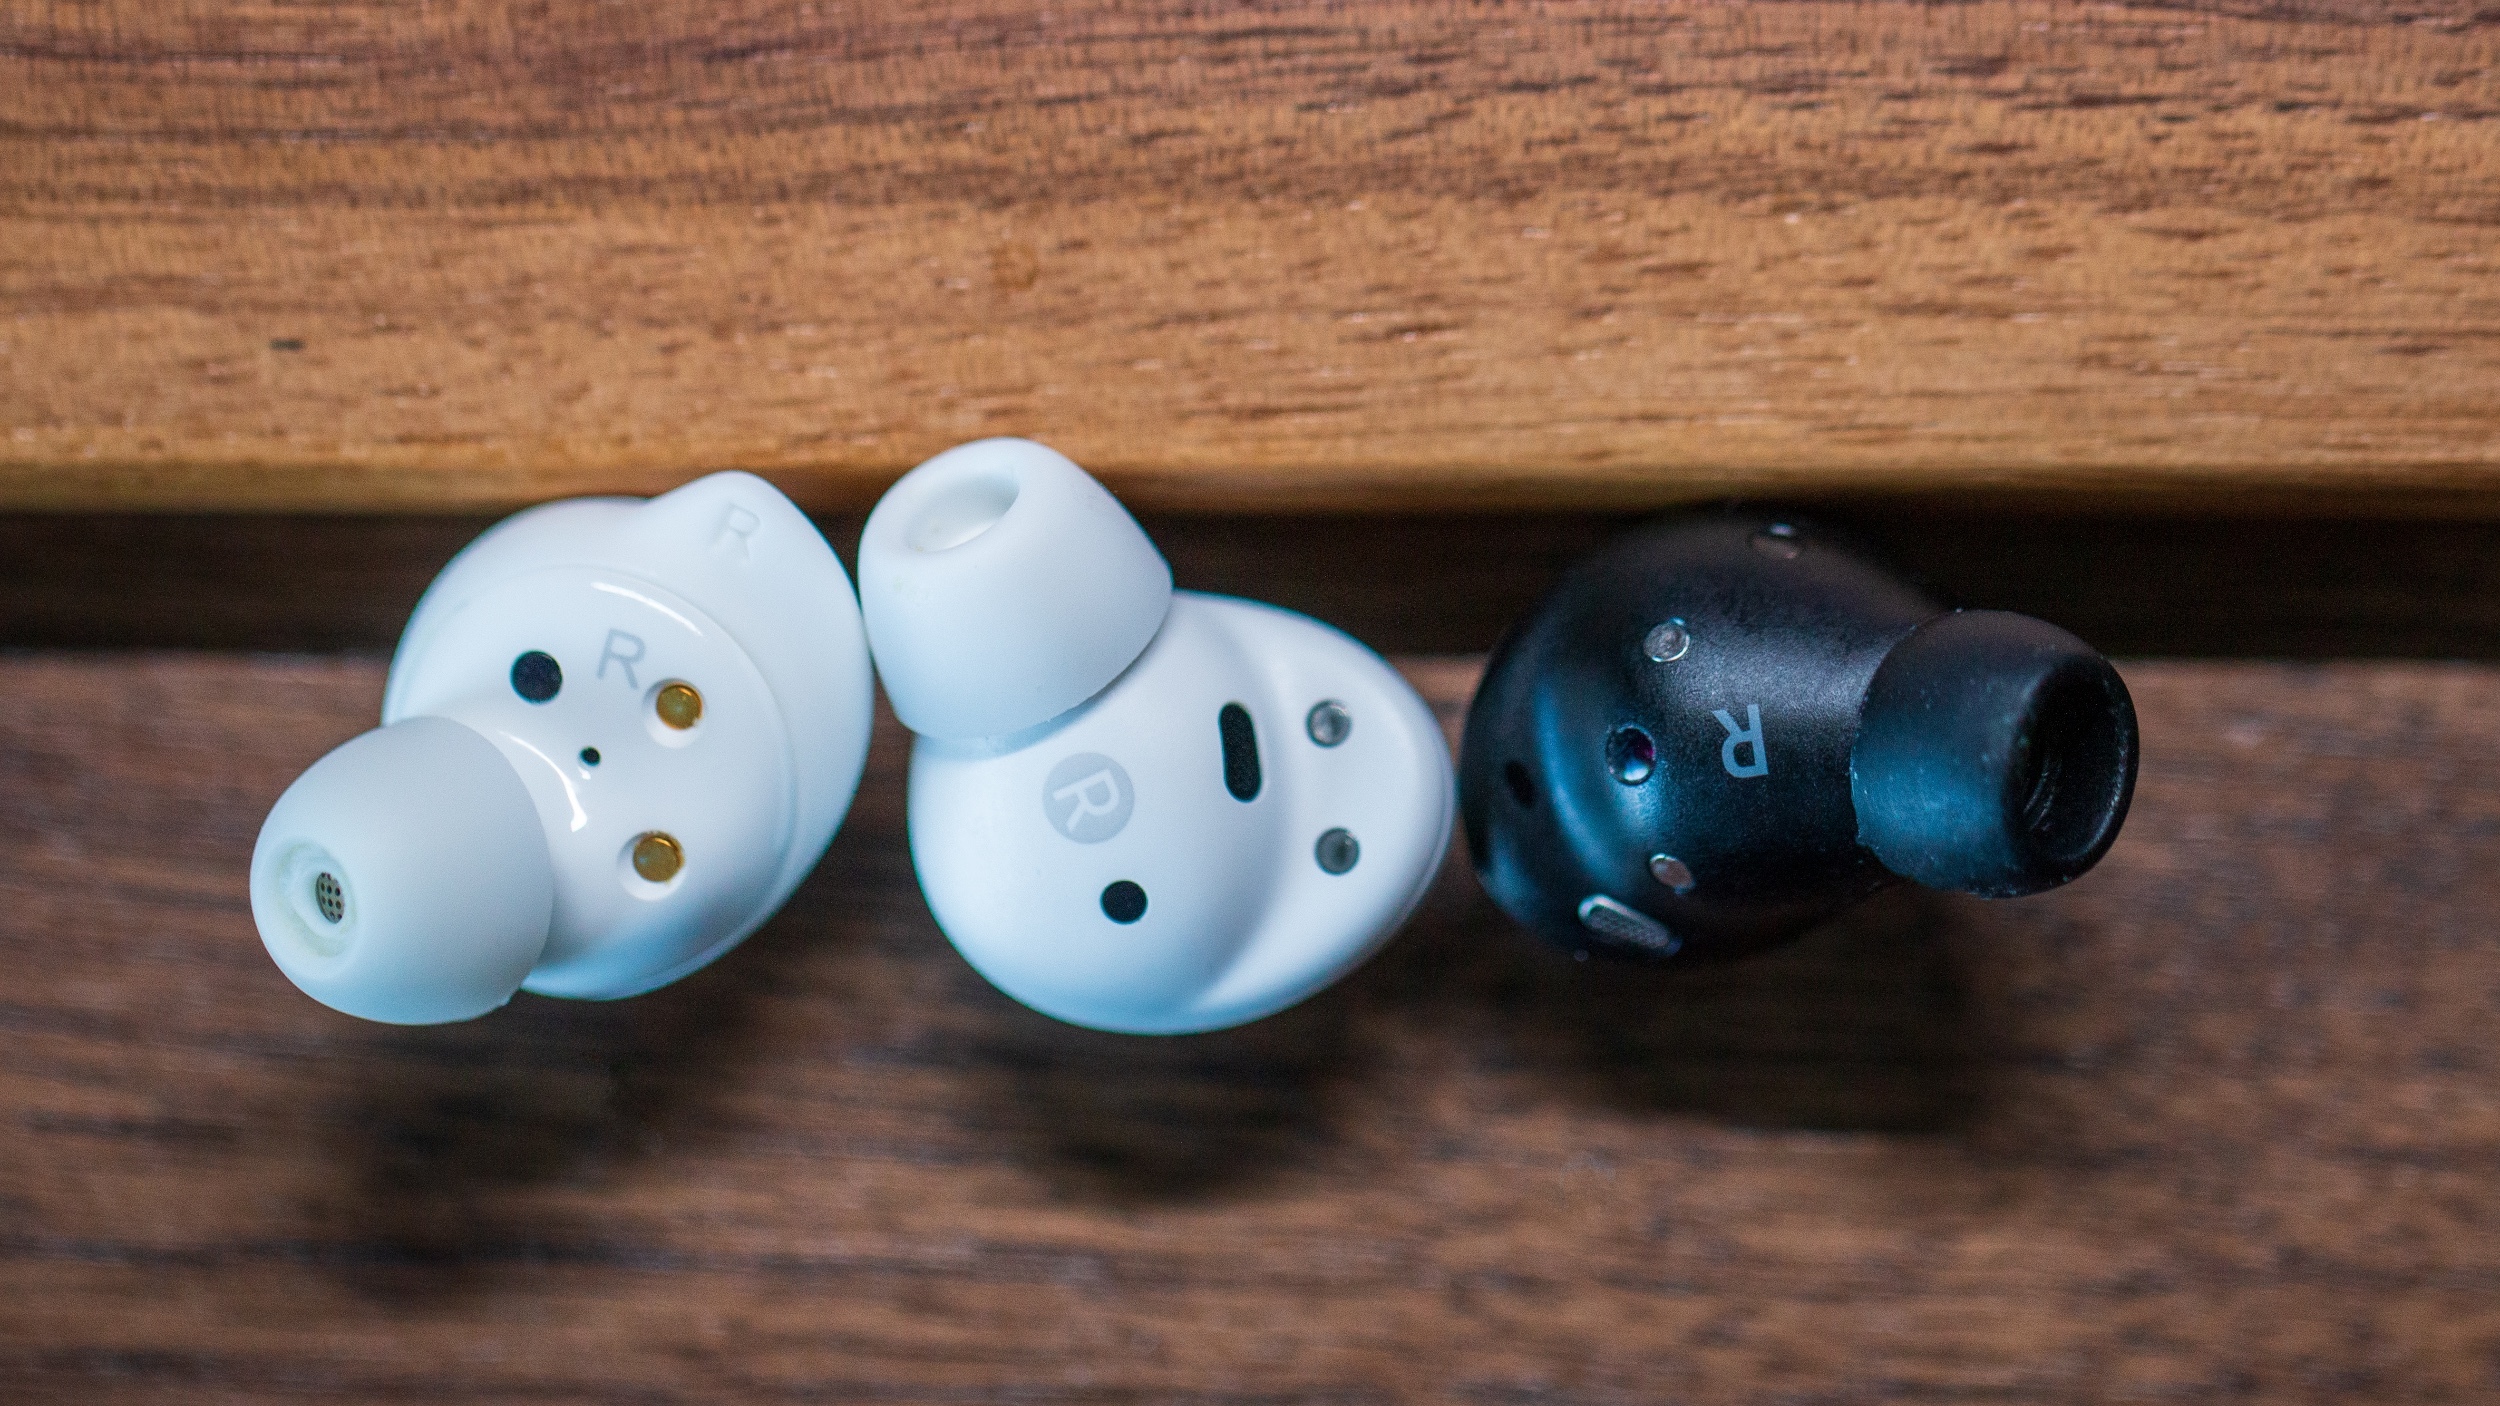 More Samsung Galaxy Buds Pro 2 details revealed in new leak -   News